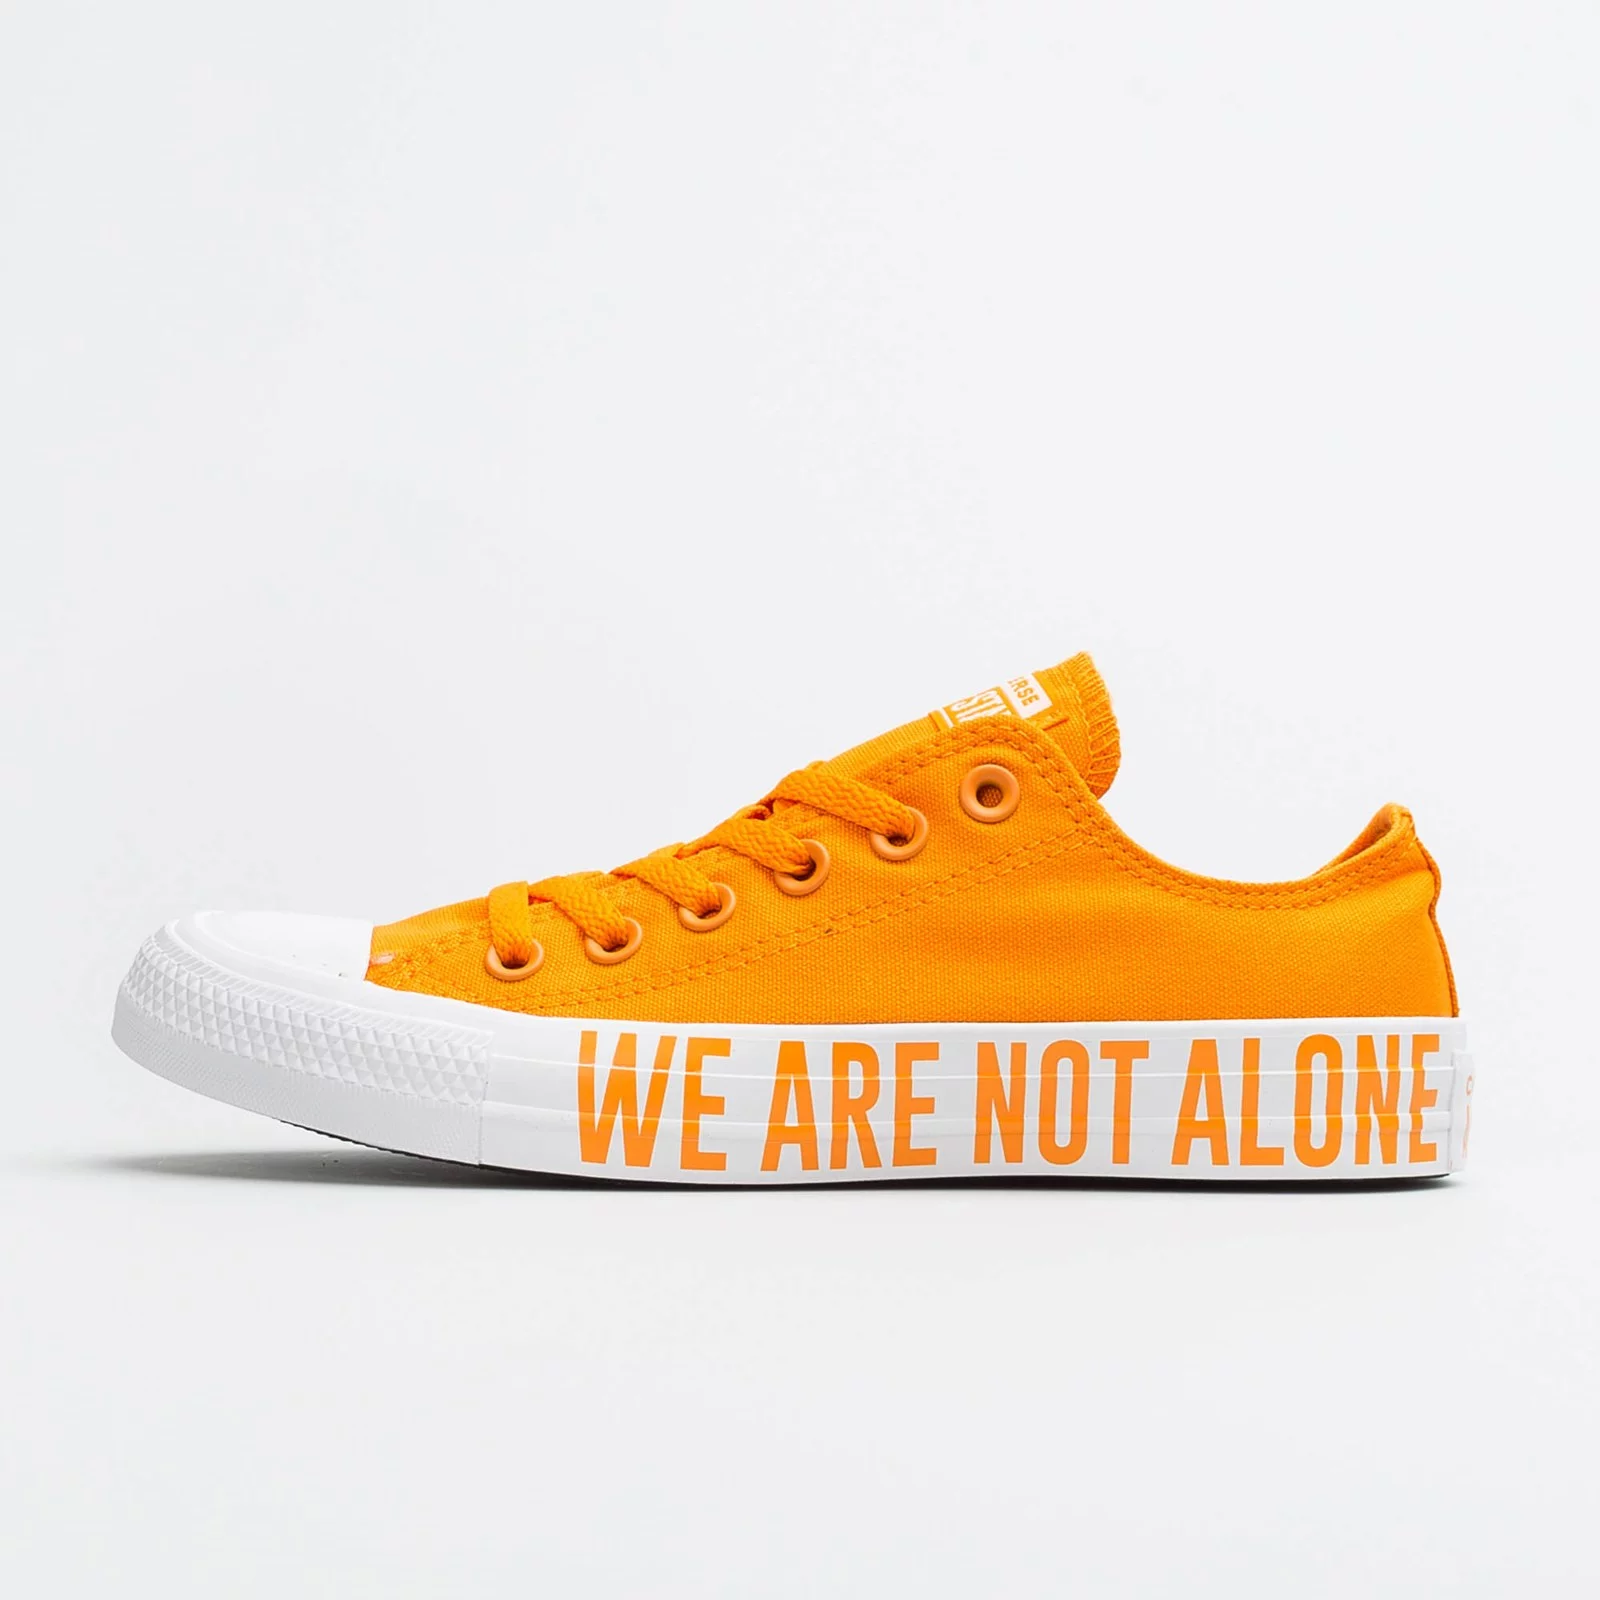 stout Luske system Women's sneakers Converse Chuck Taylor All Star We Are Not Alone Orange  Rind/White/White 165385C